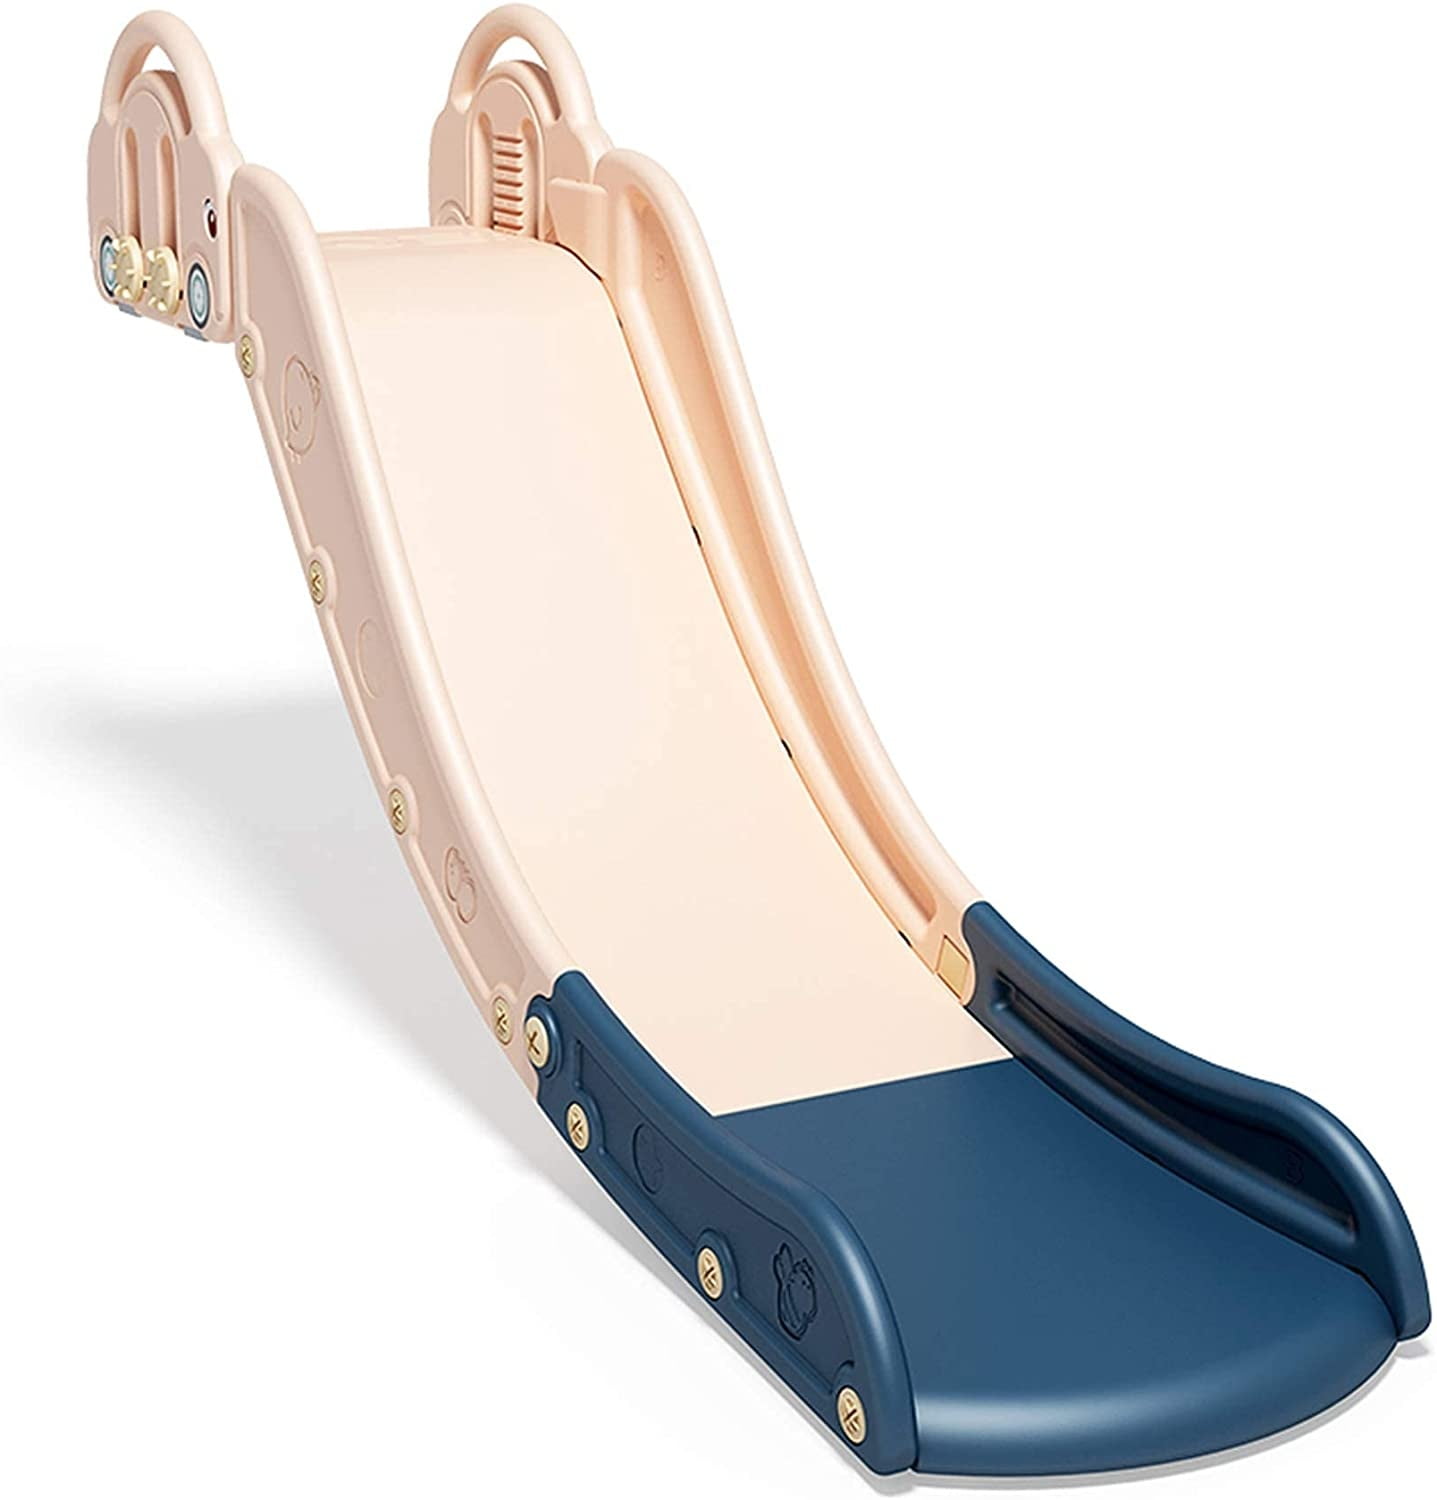 DUKE BABY Indoor Slide for Sofa Slide Attachment to Toddler Bed and Nugget Couch  Slide for Kids Age 1-5, Blue - AliExpress